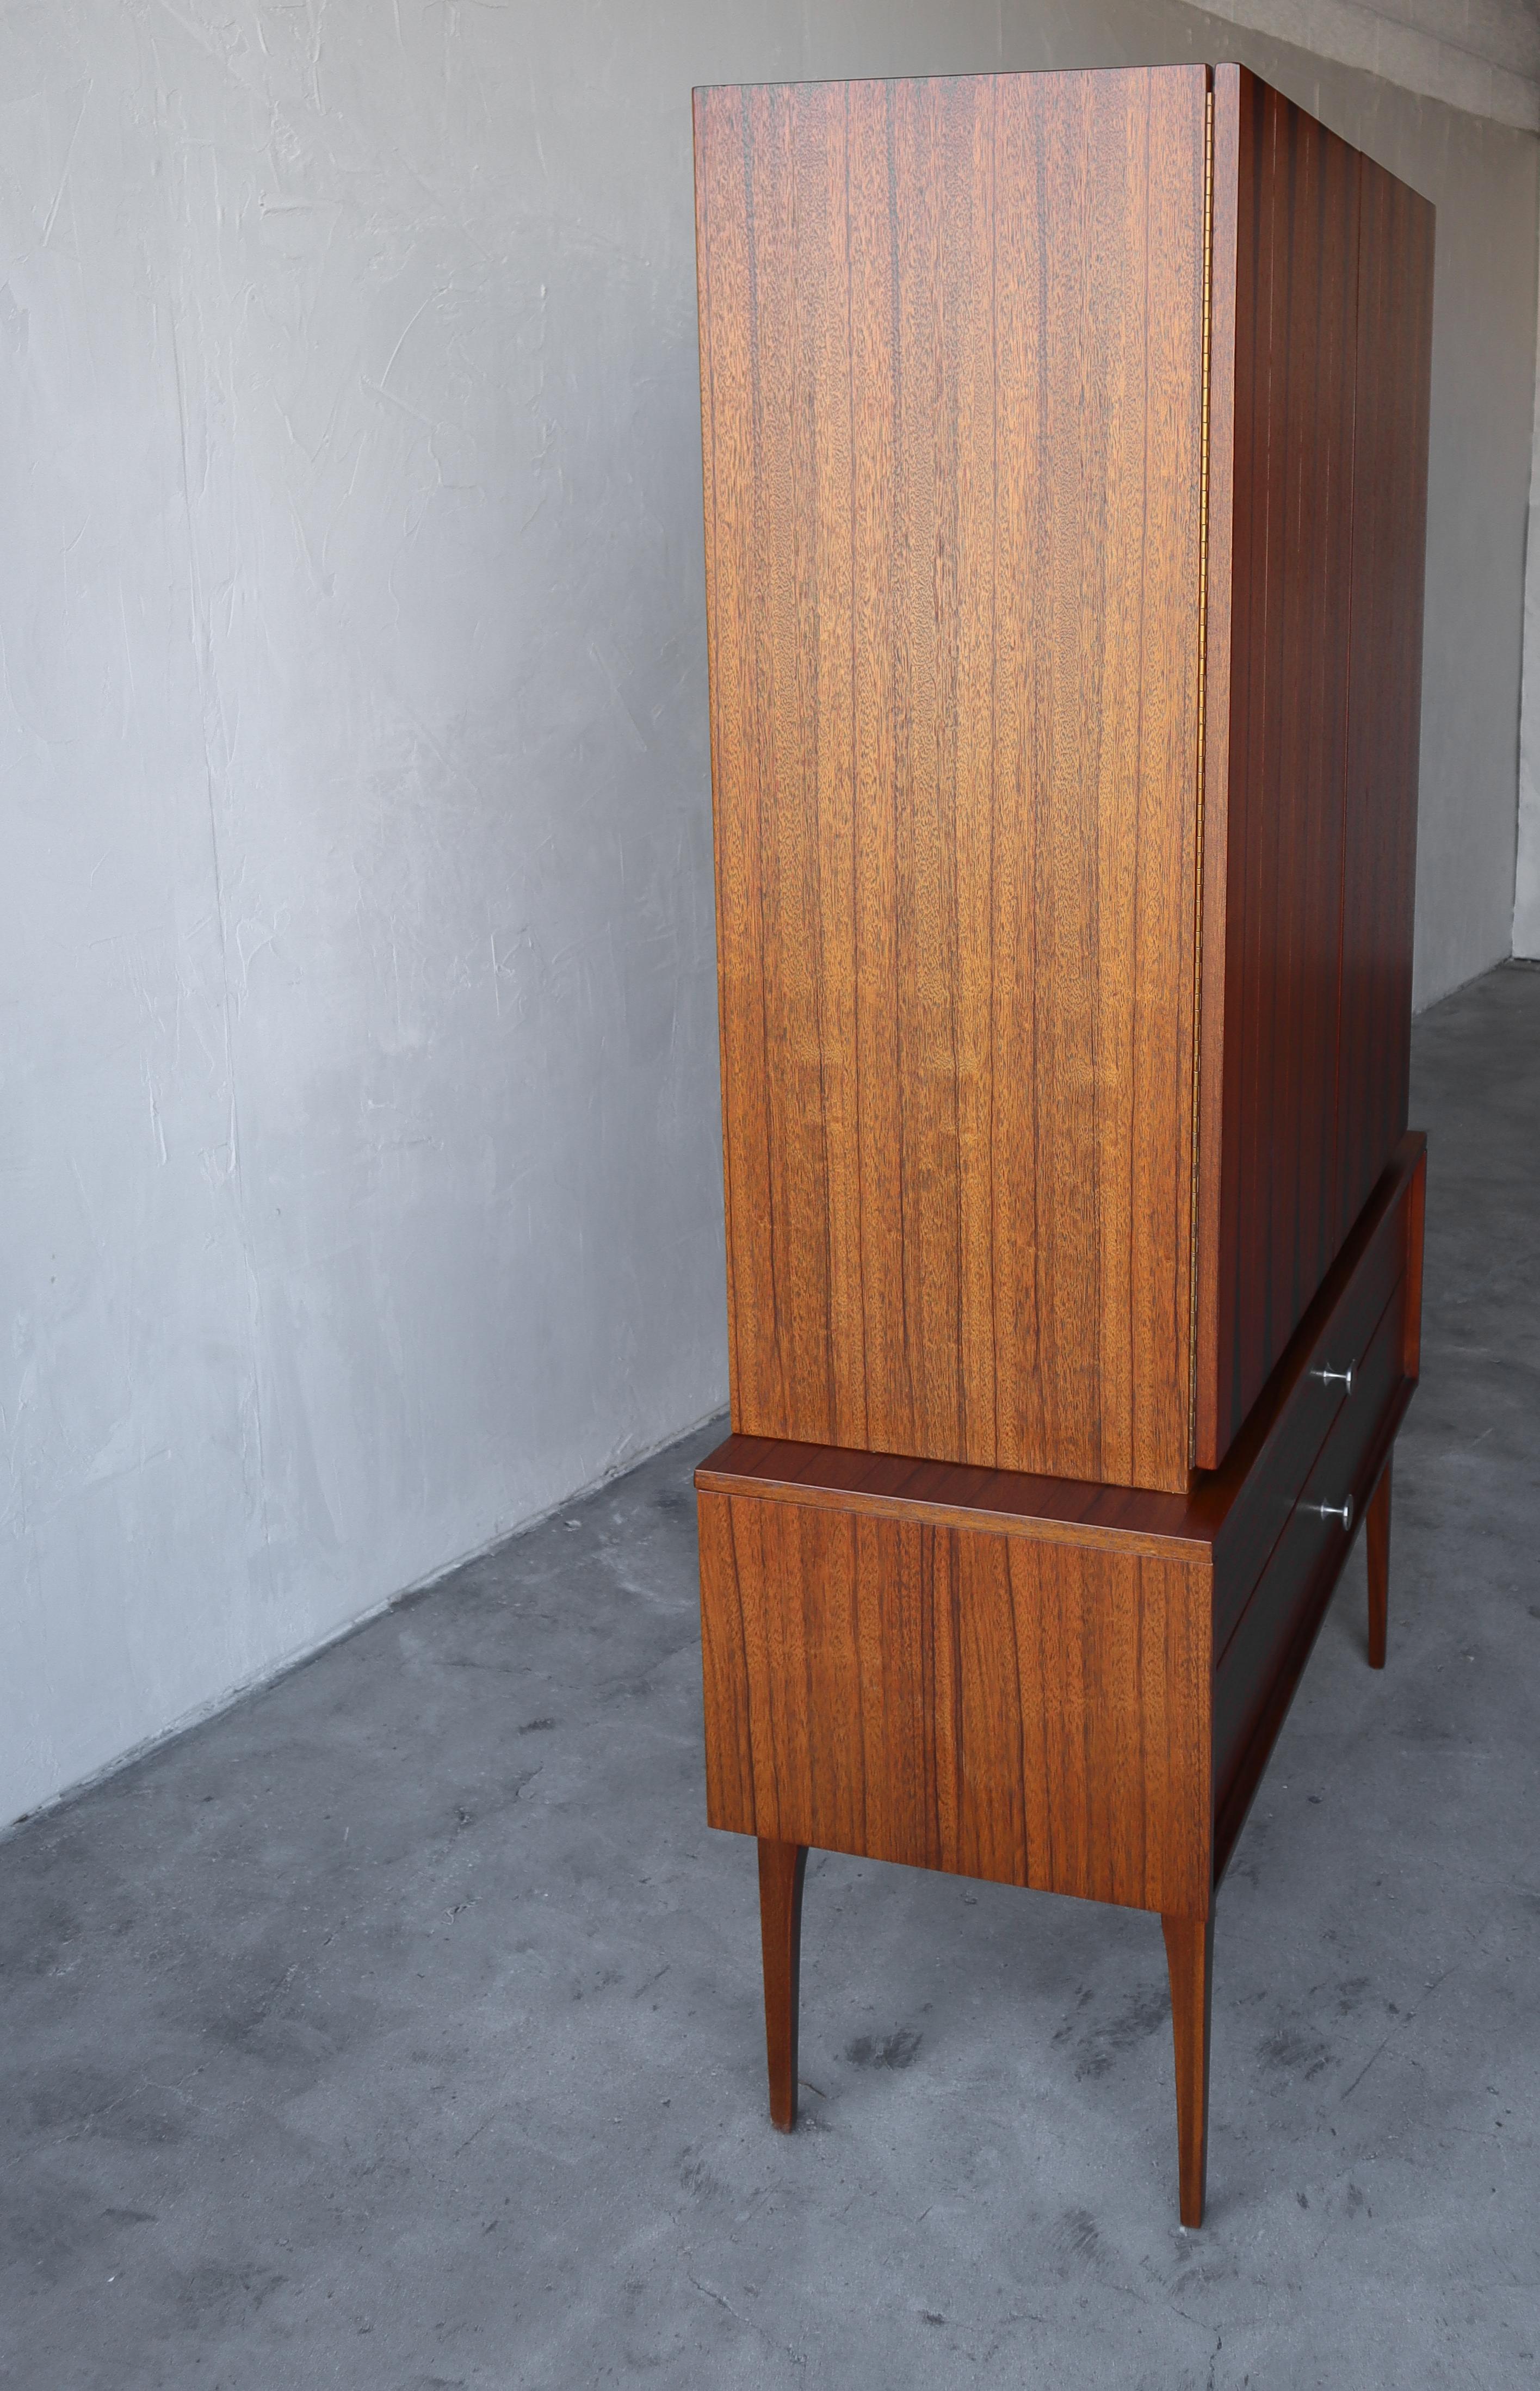 Rare Walnut and Rosewood Mid Century Armoire Dresser by Lane 1